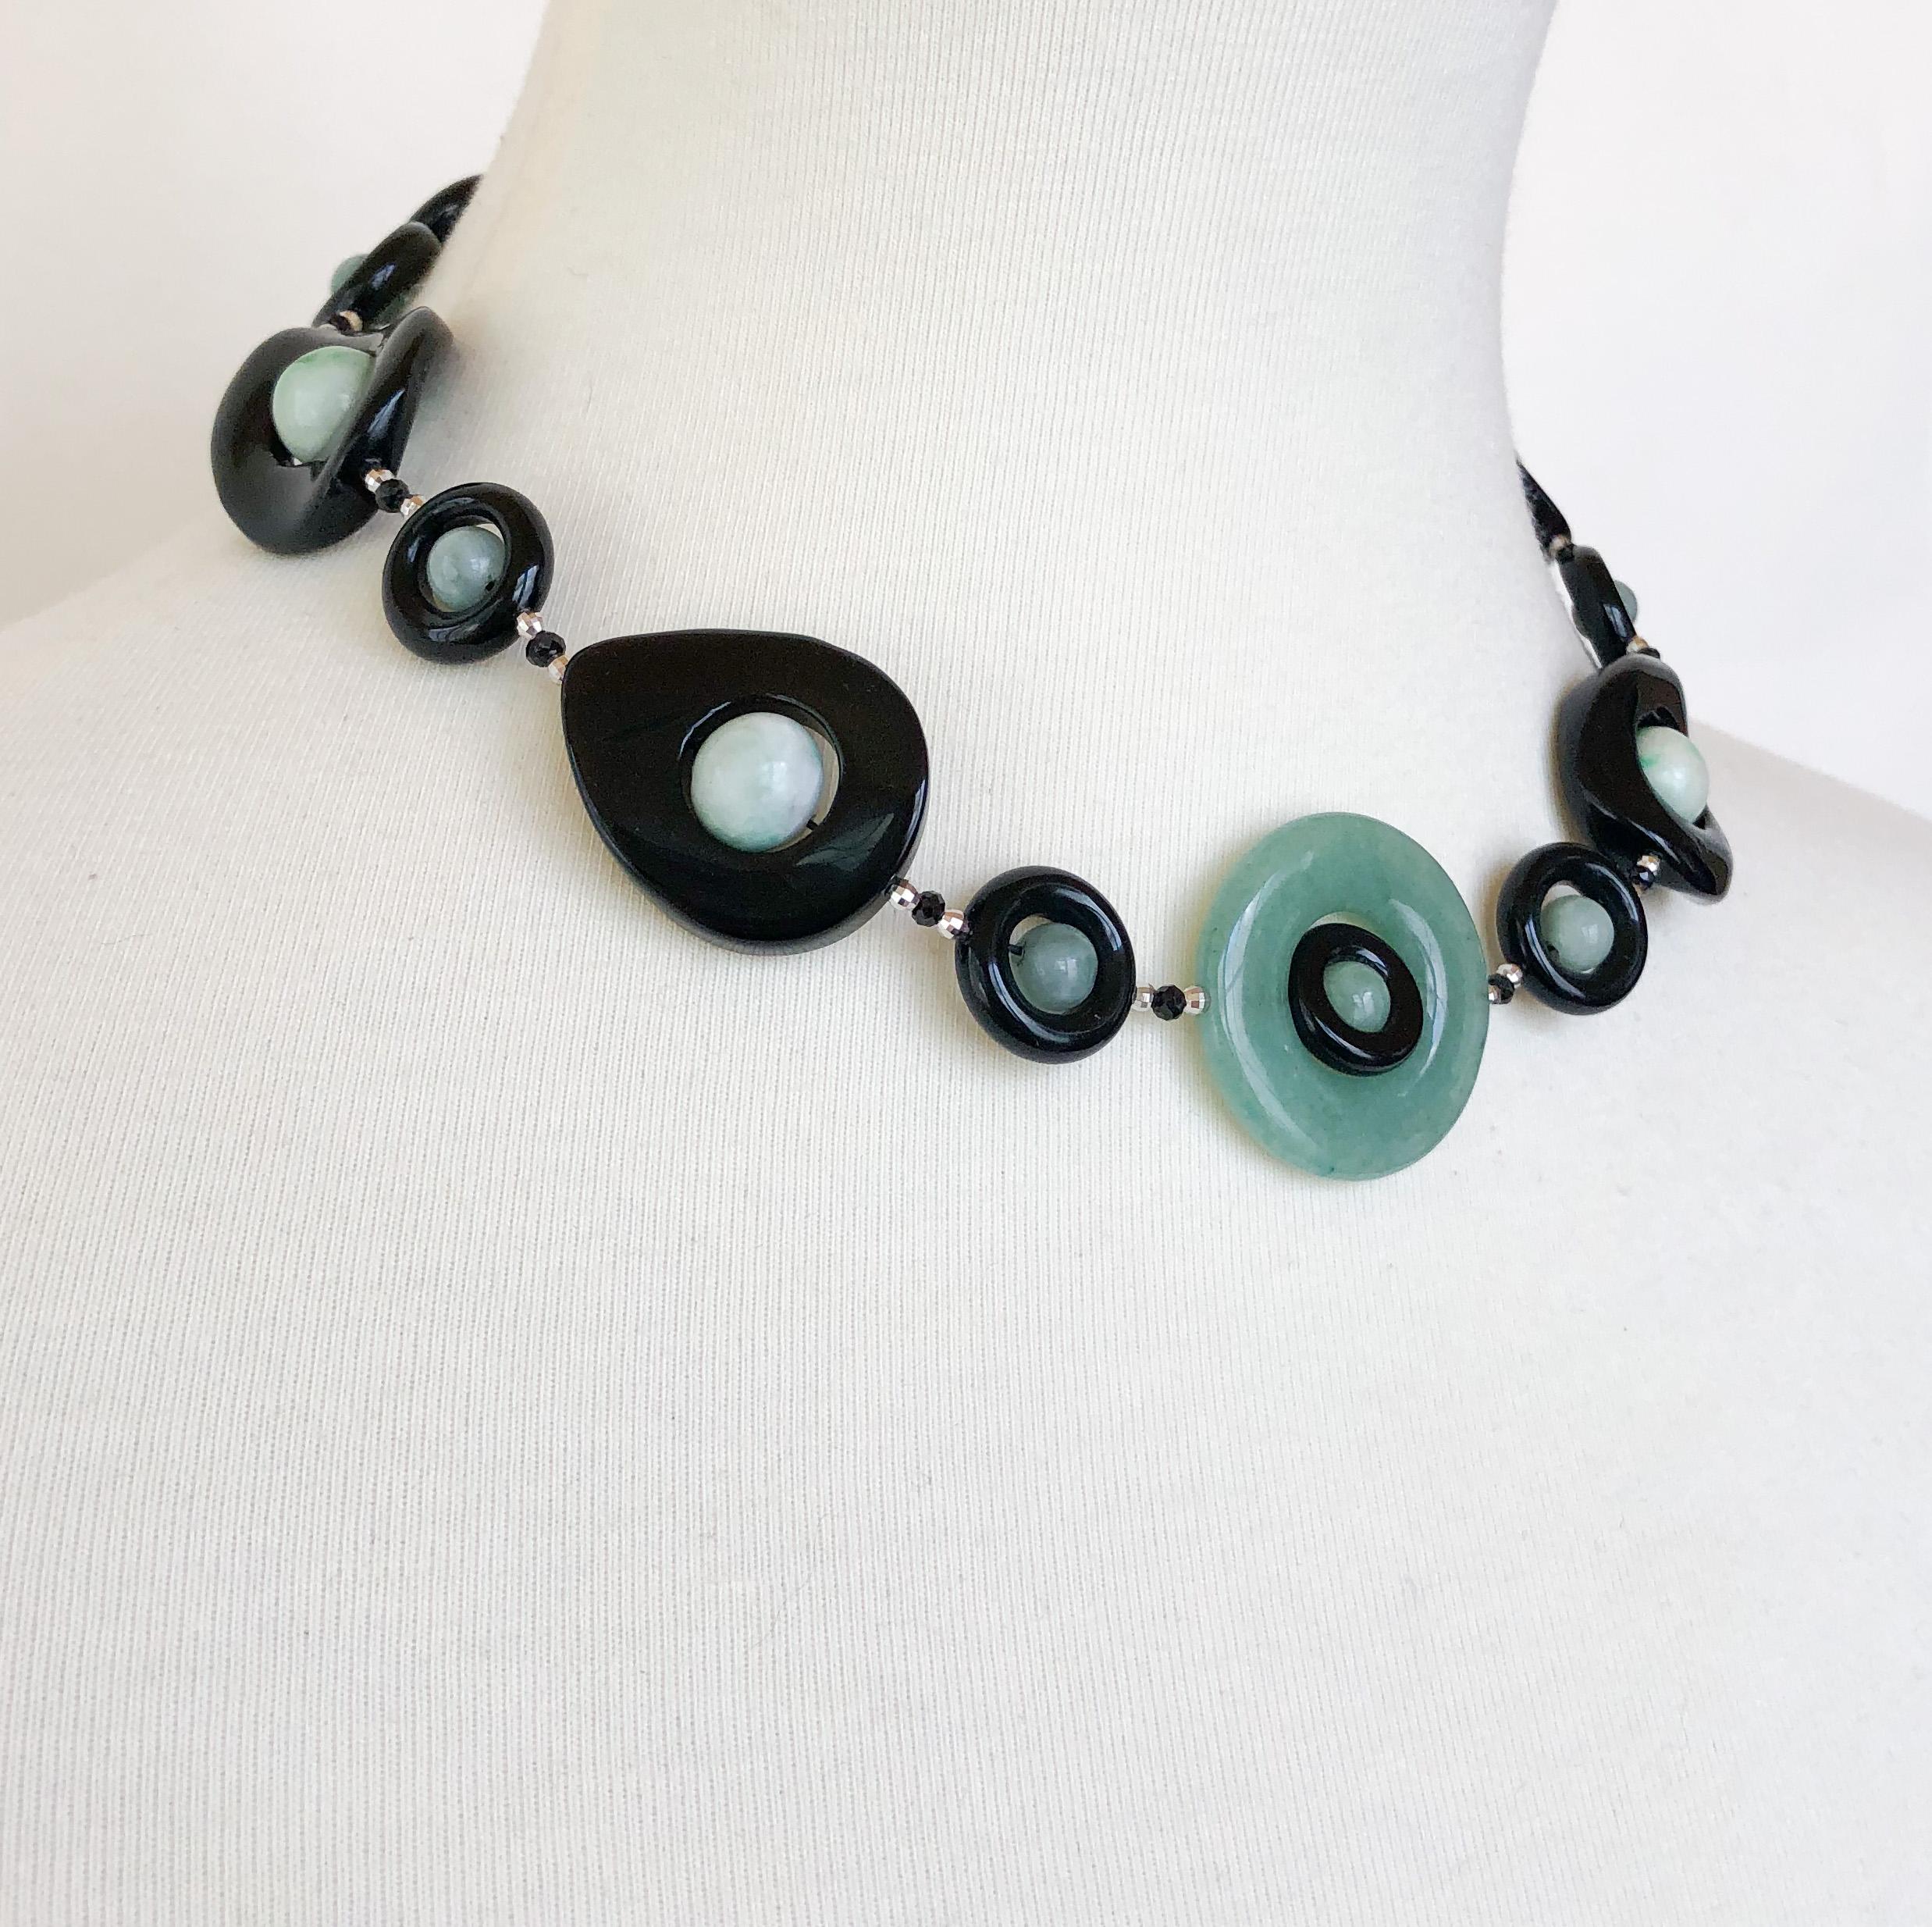 Artisan Marina J. Jade and Black Onyx Necklace with Silver Rhodium-Plated Clasp